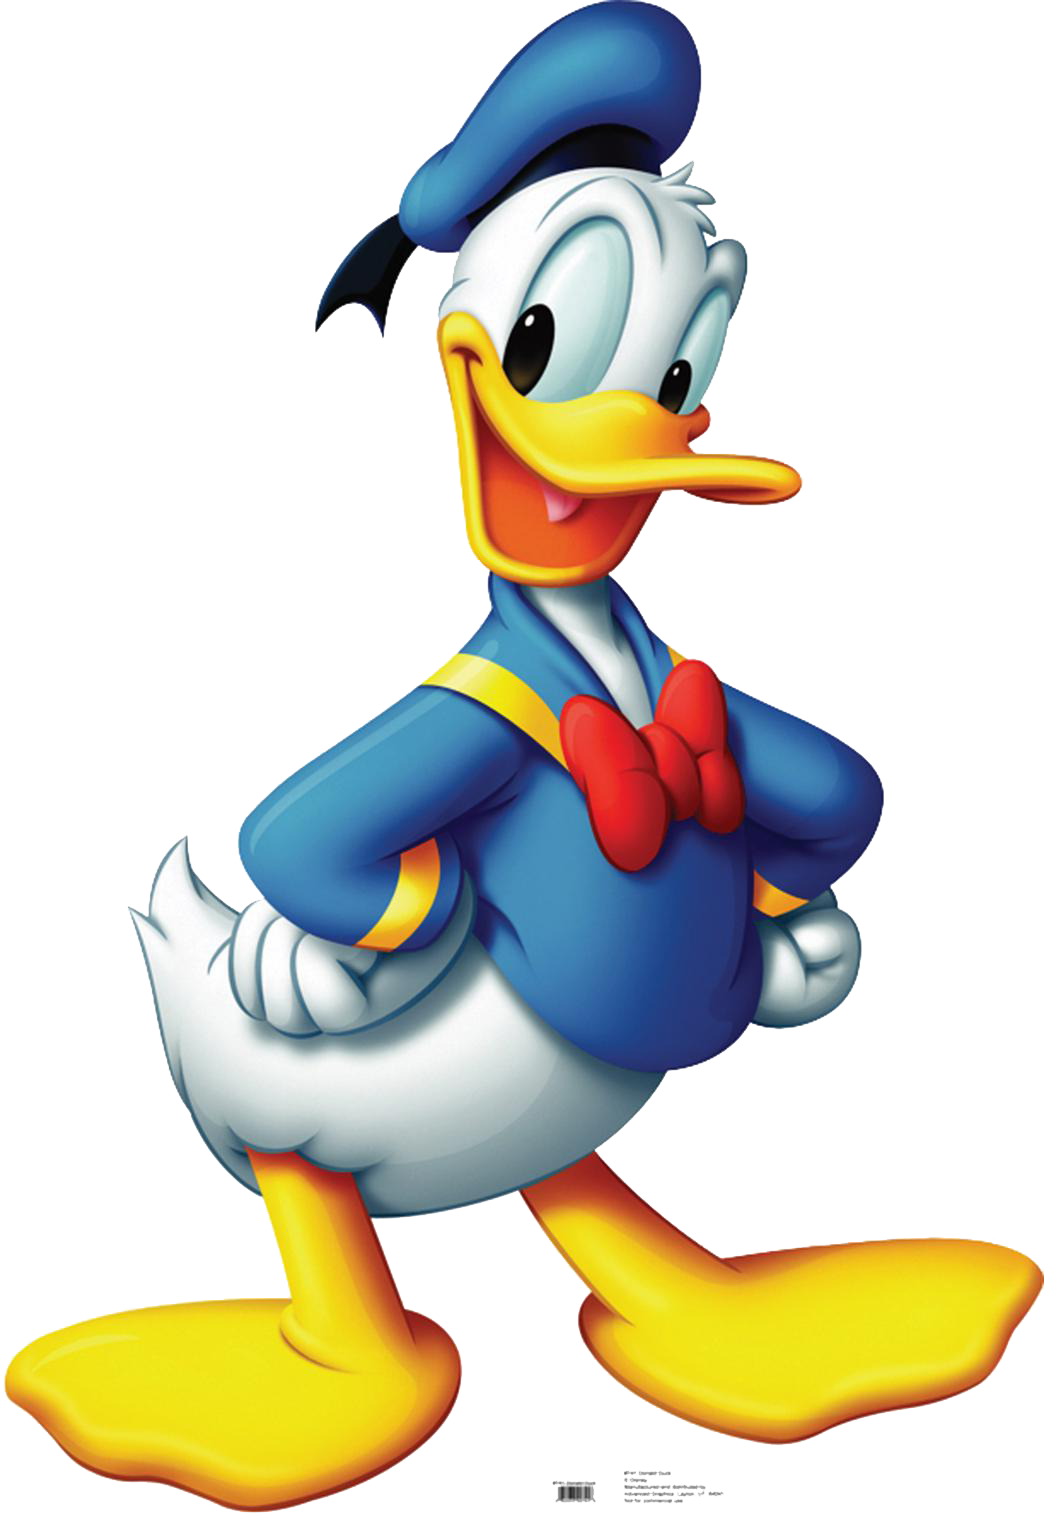 Donald png . Ducks clipart sitting duck